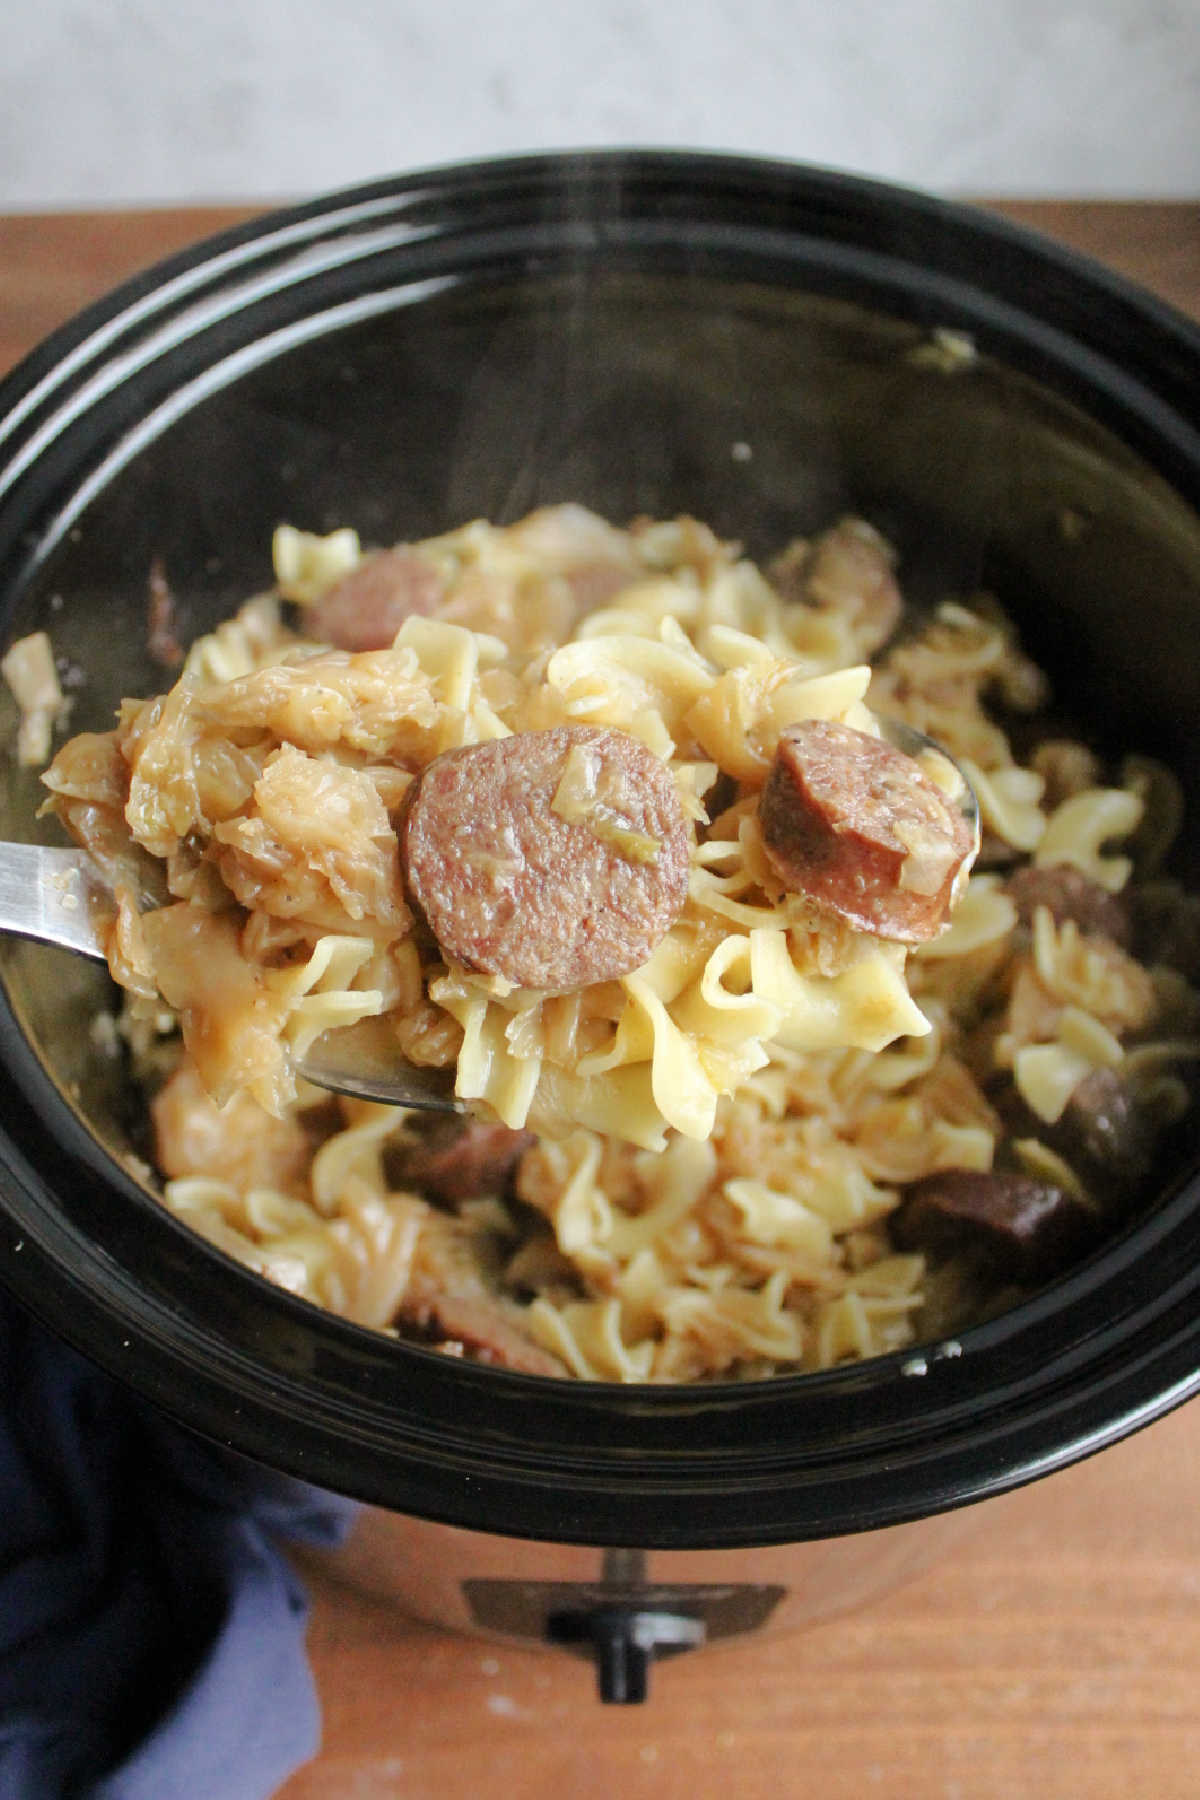 Large spoon filled with slow cooker haluski showing cooked pasta, cabbage, and sausage.